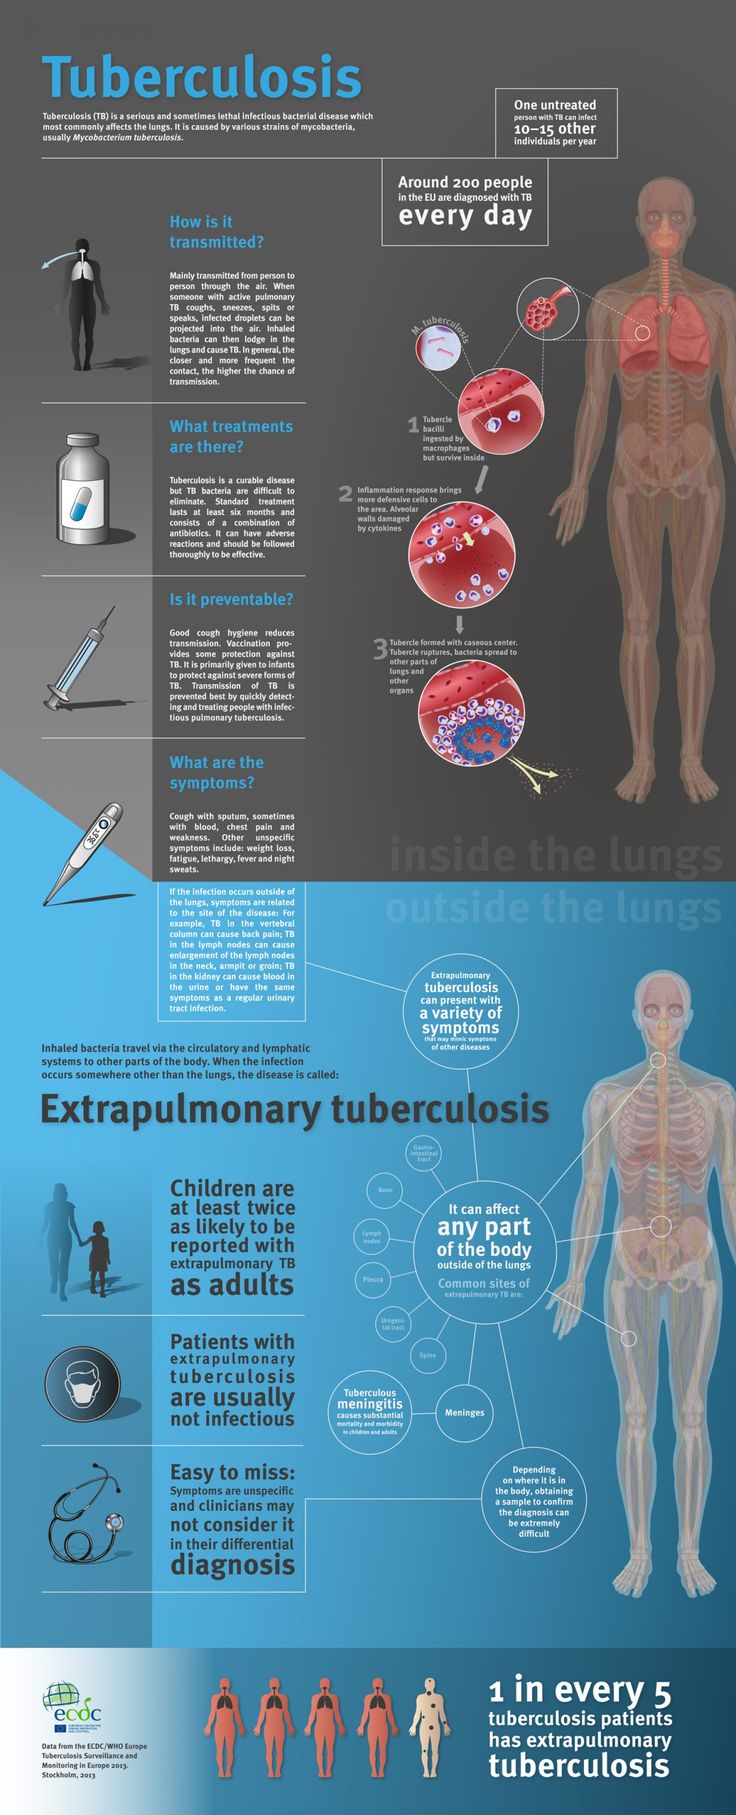 Tuberculosis is a bacterial infection that can spread through the lymph nodes and bloodstream to any organ in your body.: 